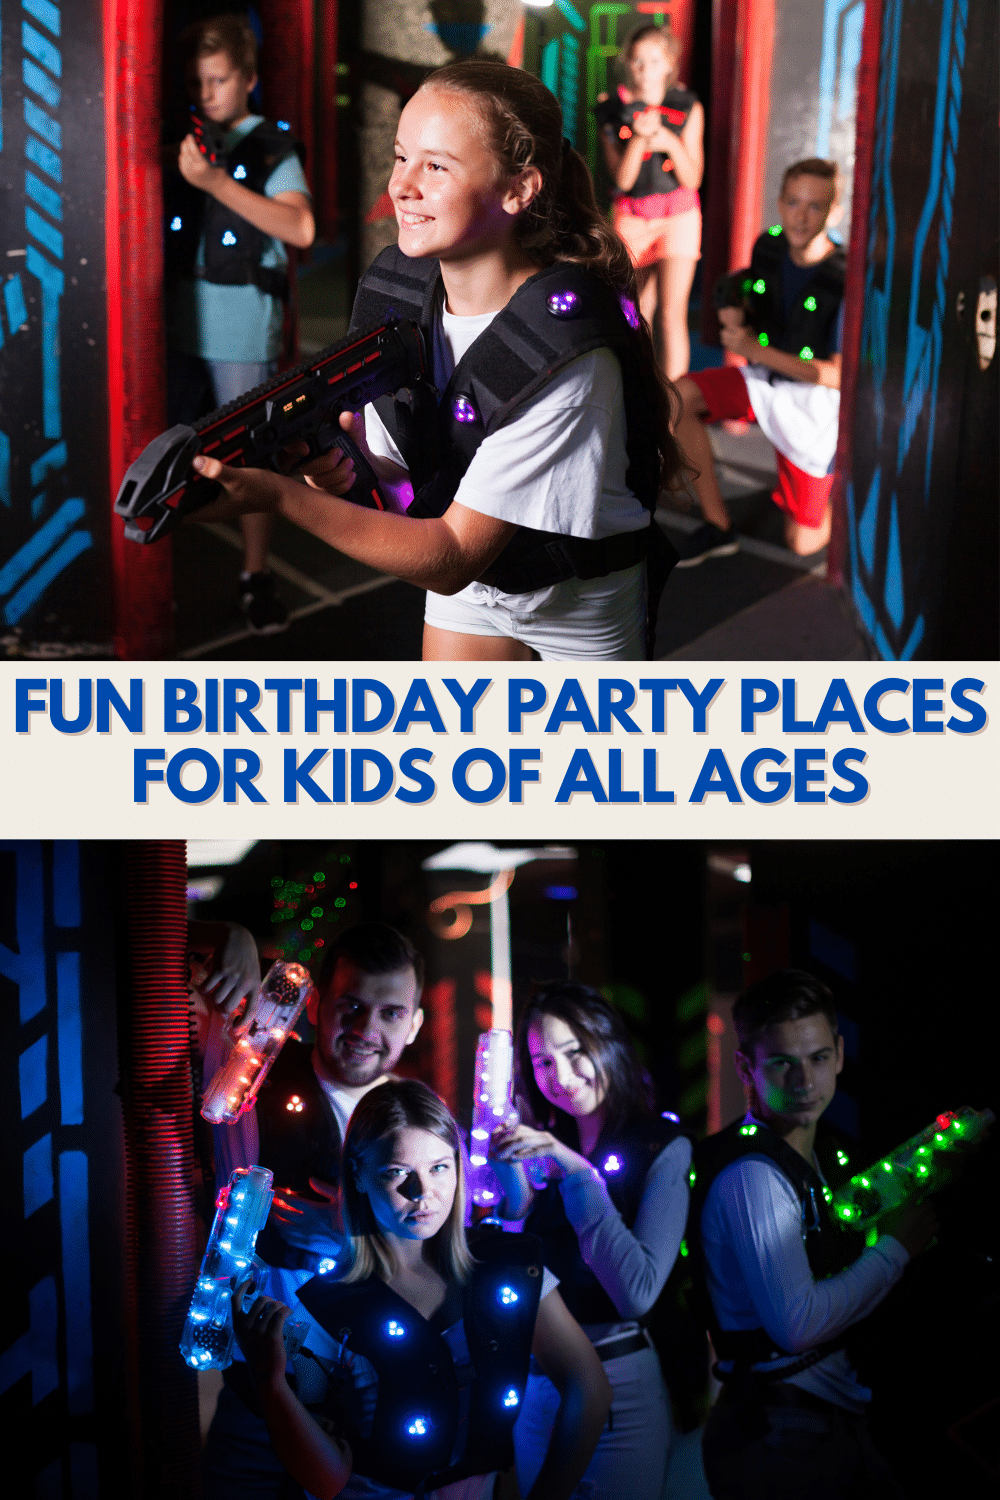 This is a great list of birthday party places for kids from toddlers through teens. These are fun, age-appropriate locations perfect for groups! #birthdayparty #birthdaypartyplaces #teens #toddlers via @wondermomwannab